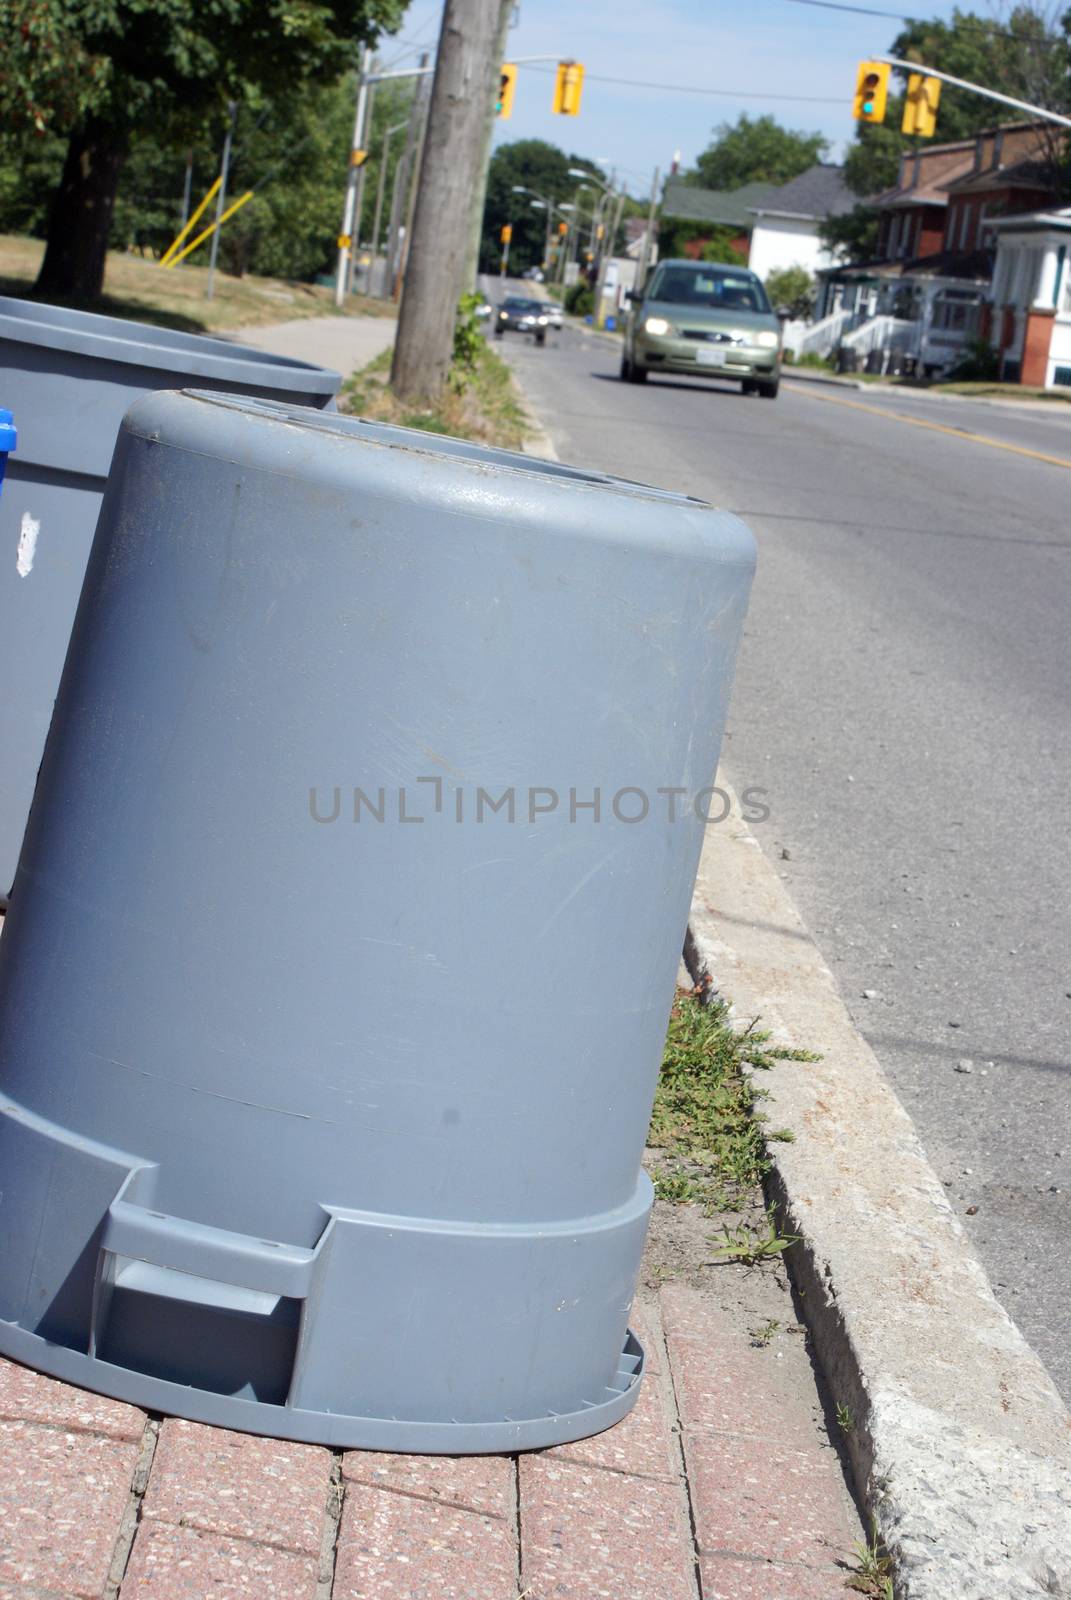 A closeup view of some garbage cans for the weekly trash pickup.